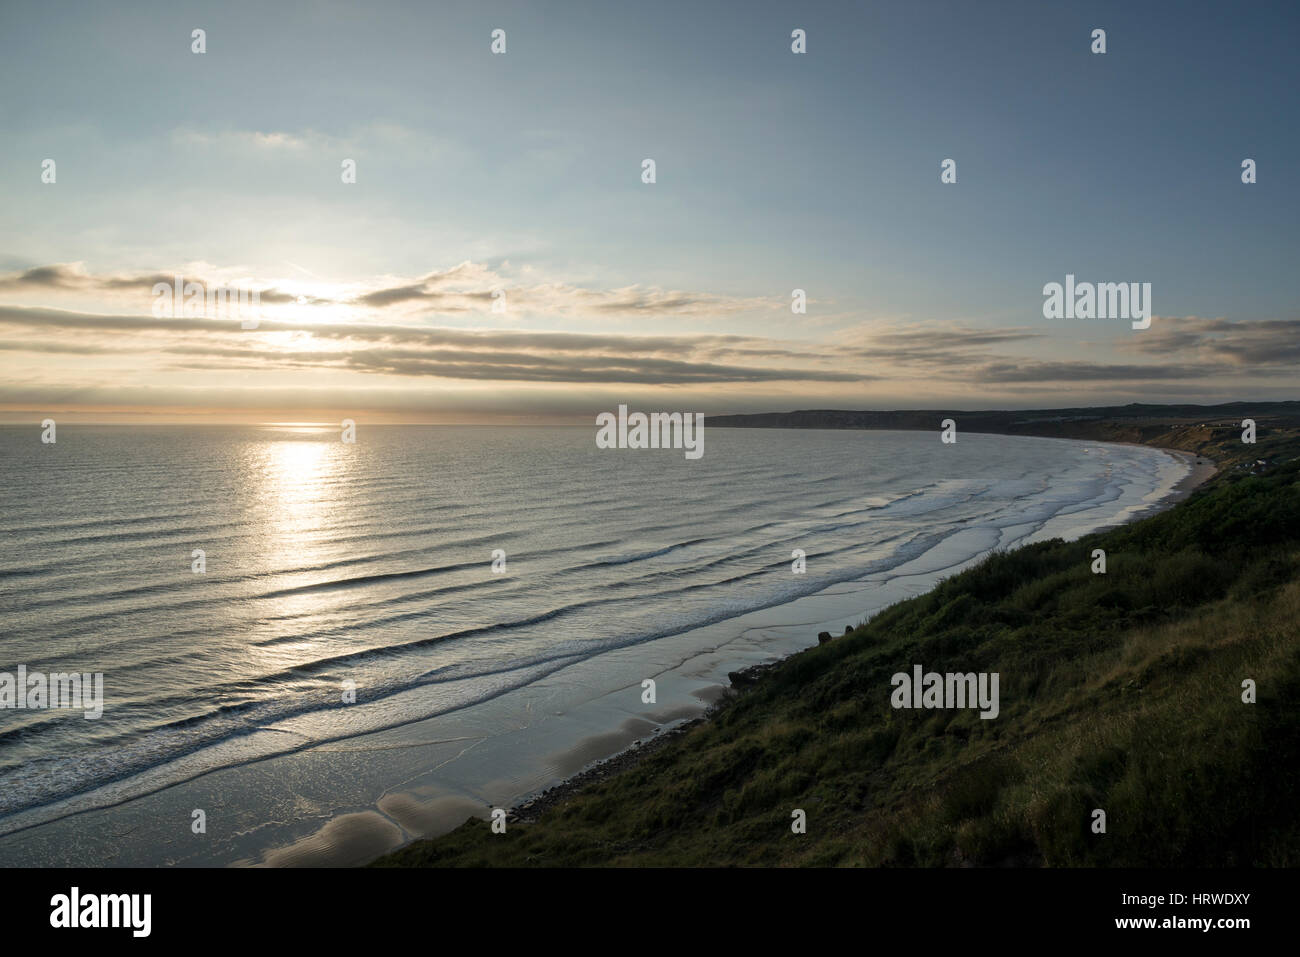 Beautiful morning at Hunmanby sands, Filey bay on the coast of North Yorkshire, England. Stock Photo